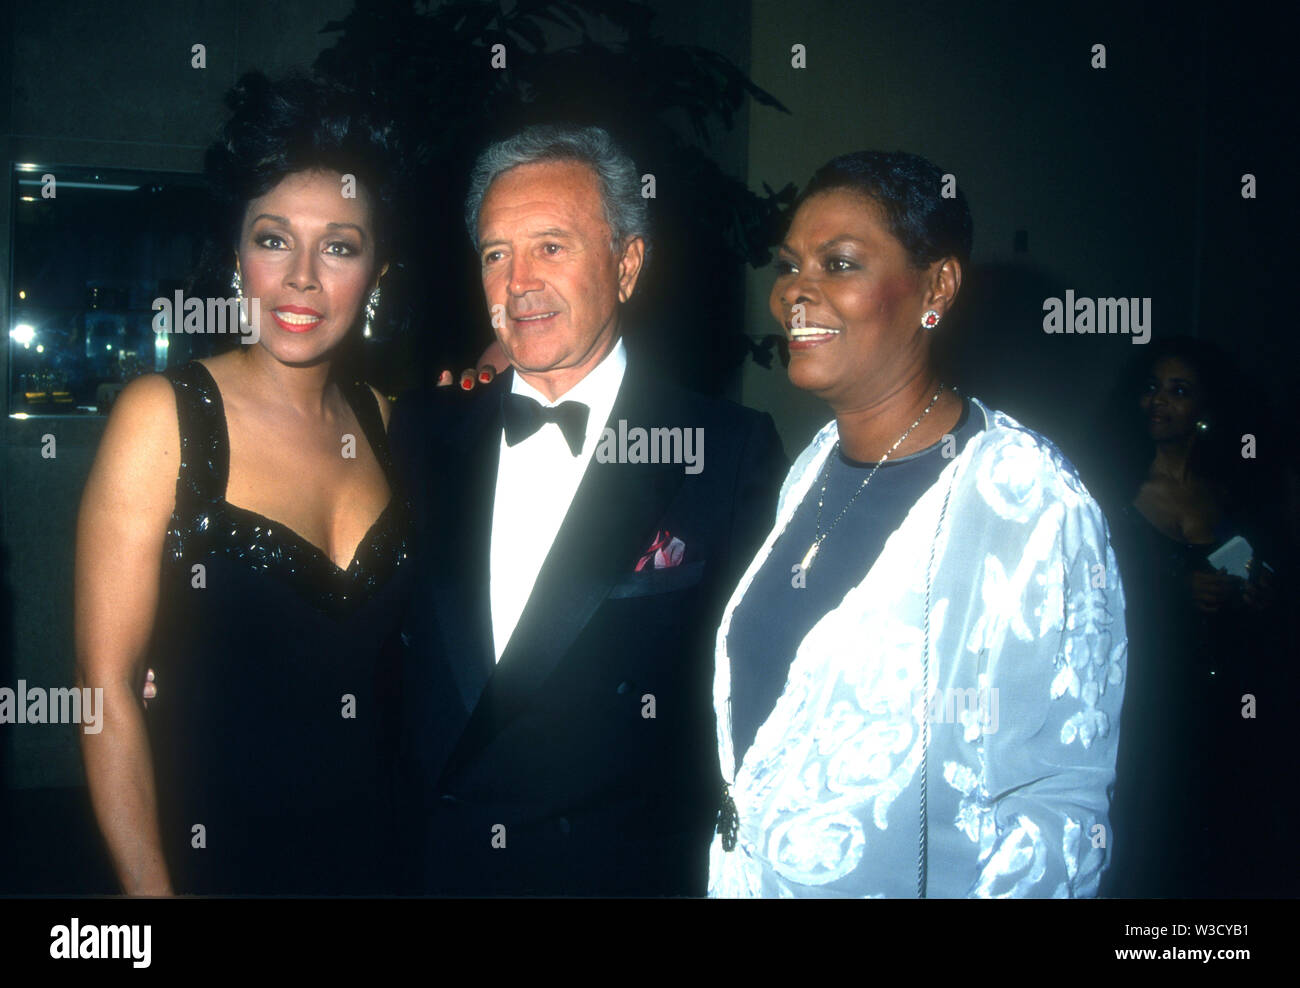 Beverly Hills, California, USA 20th September 1994 Actress Diahann Carroll, husband singer Vic Damone and singer Dionne Warwick attend the 1994 Diversity Awards on September 20, 1994 at the Beverly Hilton Hotel in Beverly Hills, California, USA. Photo by Barry King/Alamy Stock Photo Stock Photo